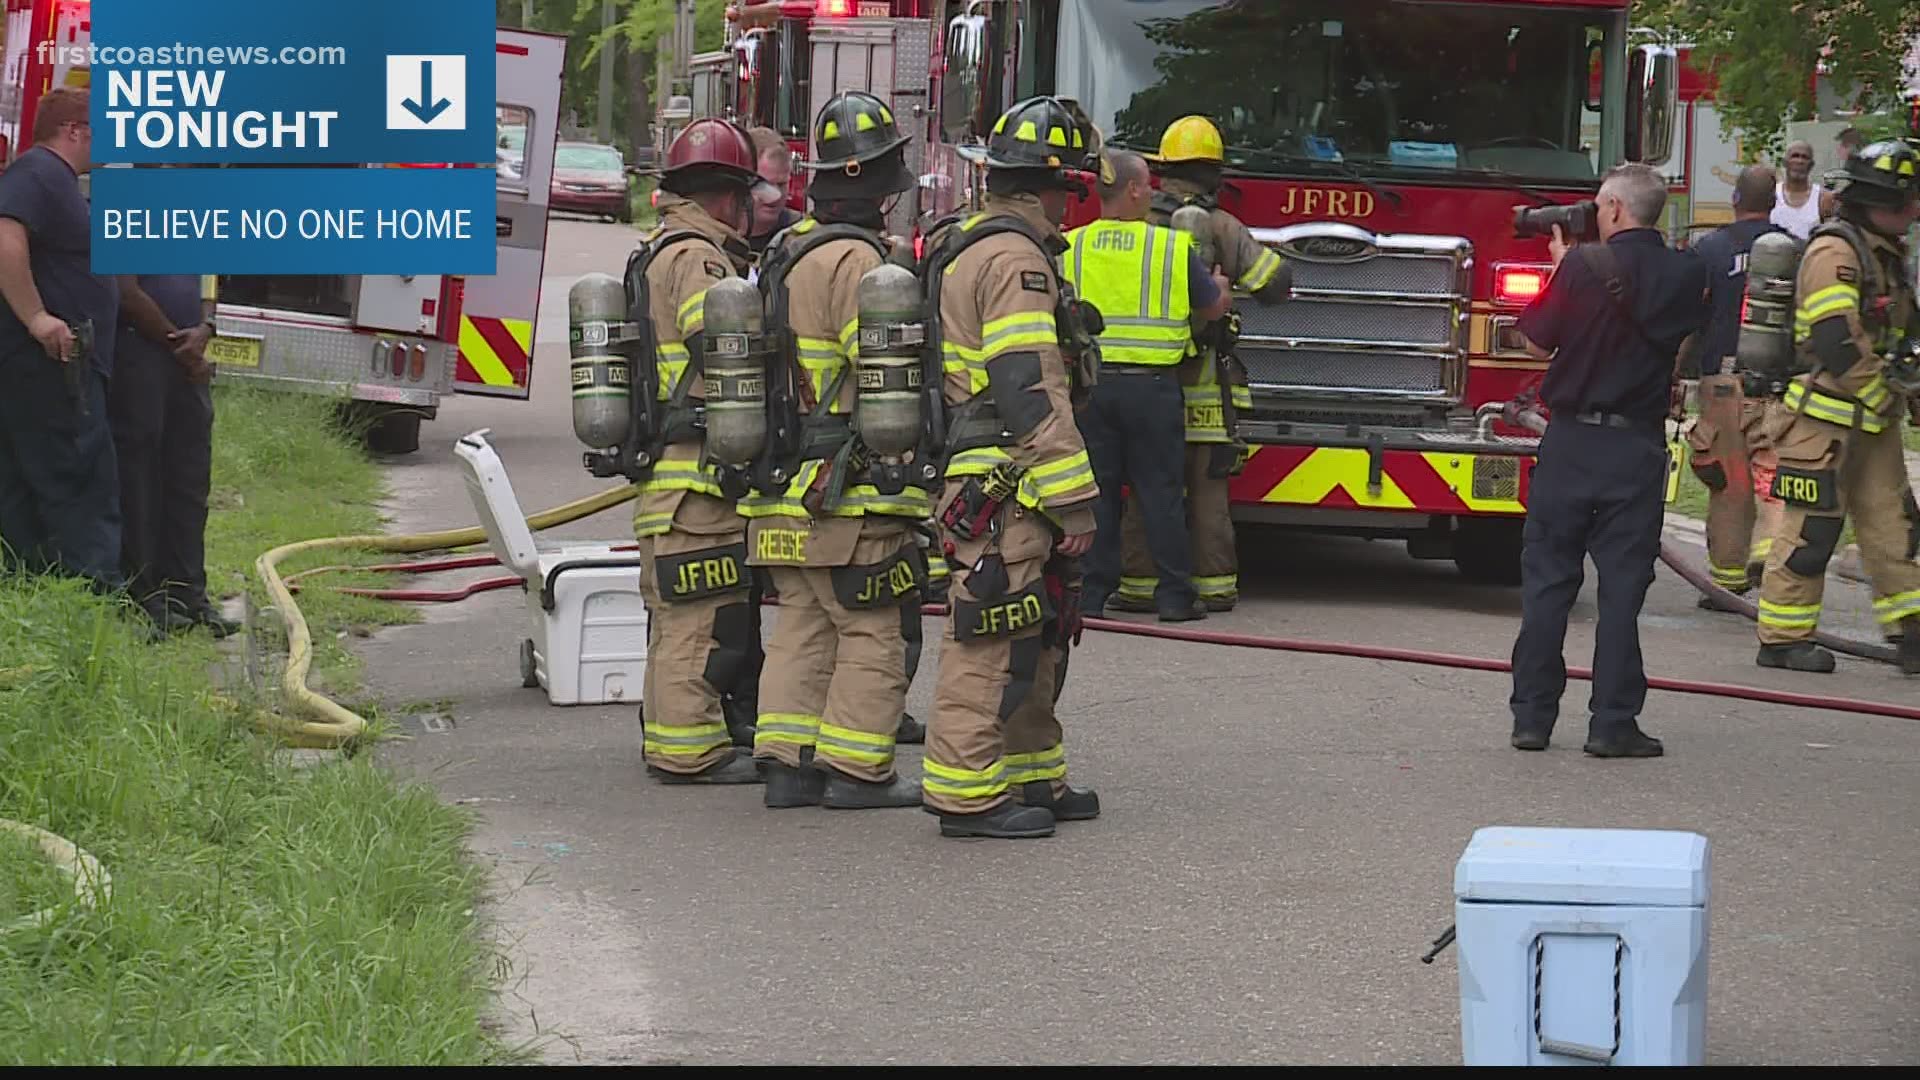 Shortly after 12:30 p.m., JFRD tweeted that crews were responding to the 1400 block of Morgan Street, where a house fire had heavy smoke showing.